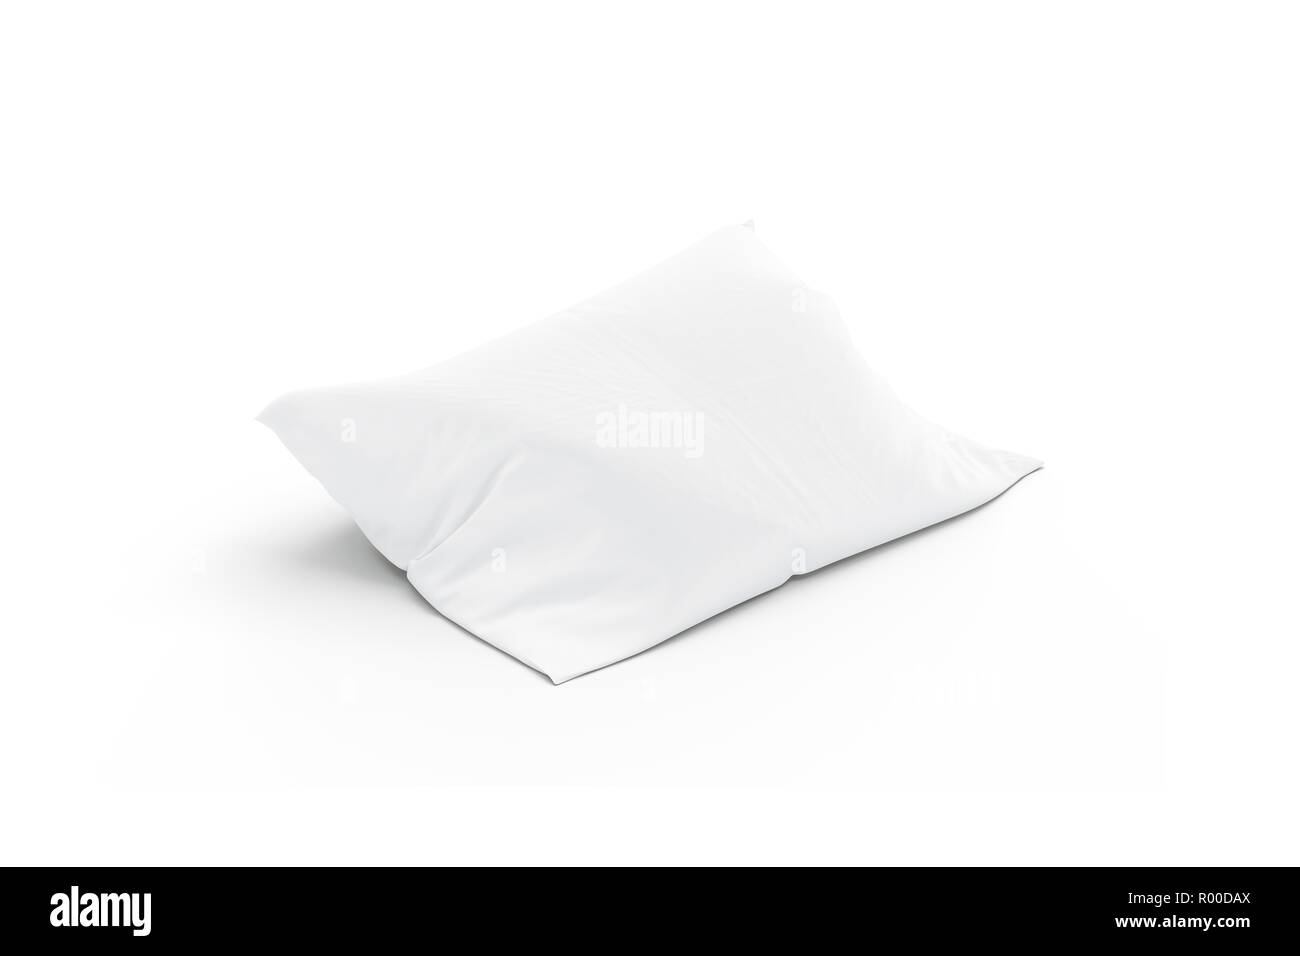 Blank white pillow mockup, isolated, side view, 3d rendering. Empty cushion for sleep mock up. Clear comfort pad in pillowcase. Bedding pilow for nap or relax template. Stock Photo